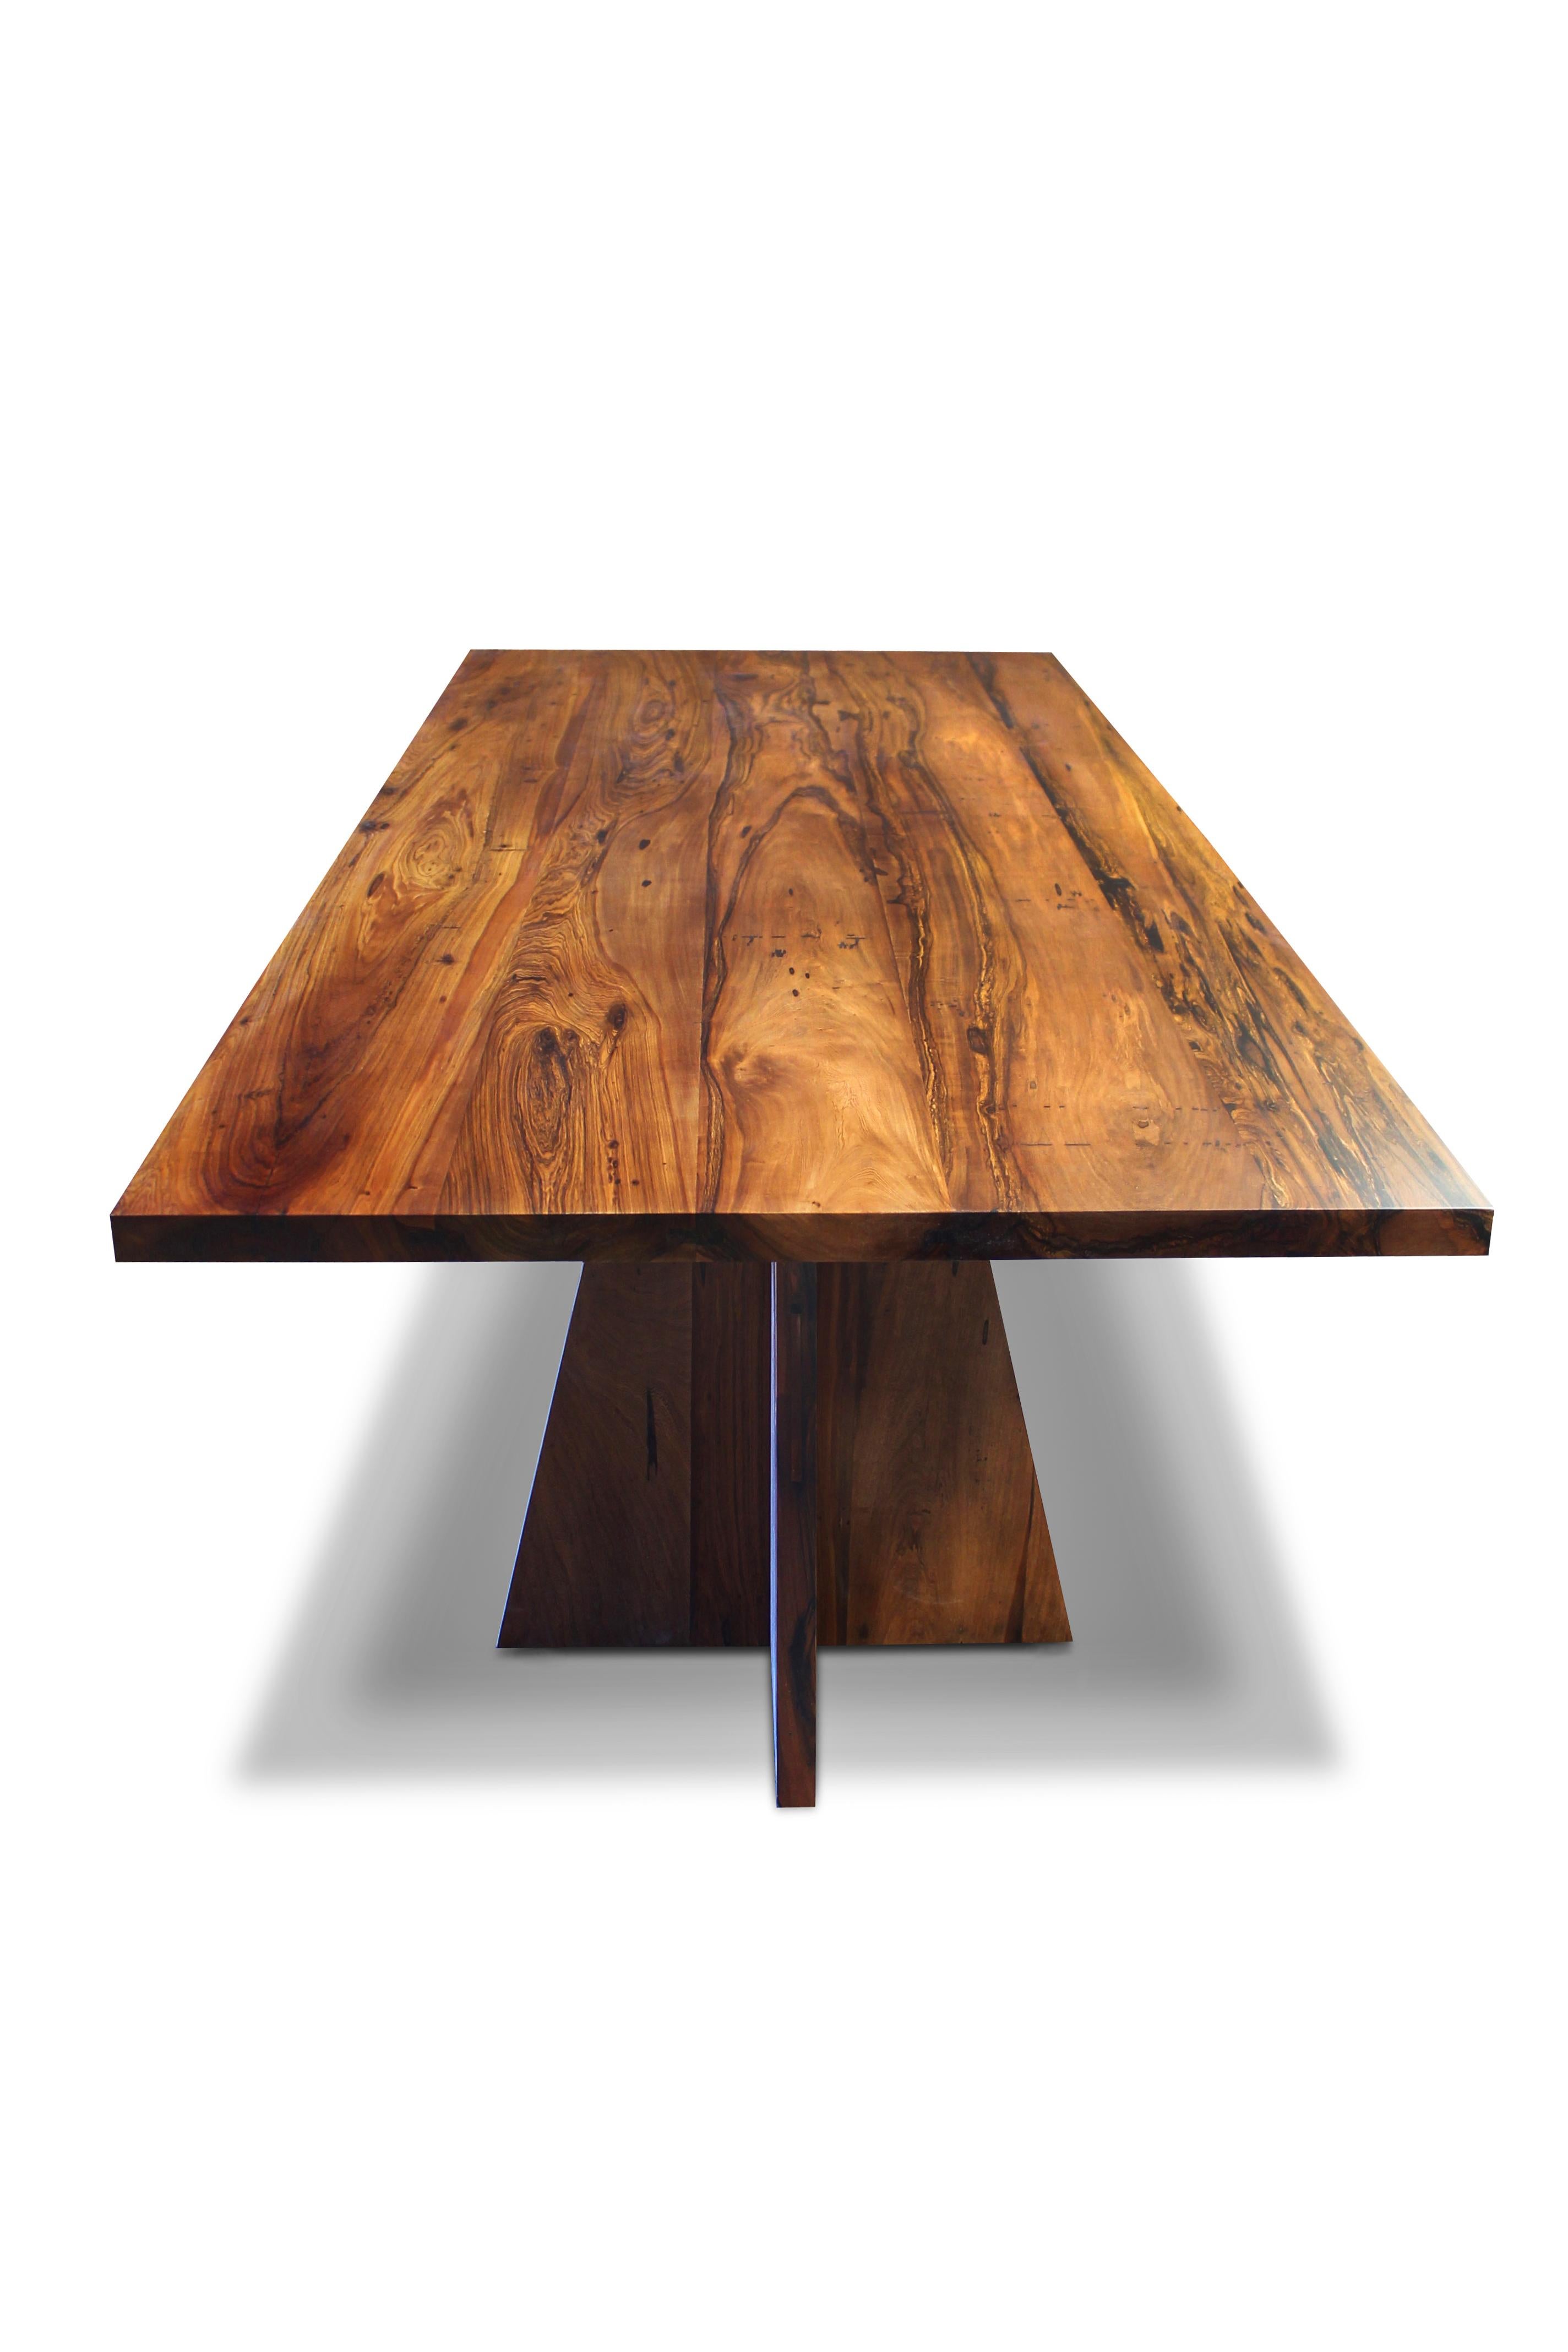 Organic Modern Solid Argentine Rosewood Twin Pedestal Luca Table from Costantini - In Stock For Sale